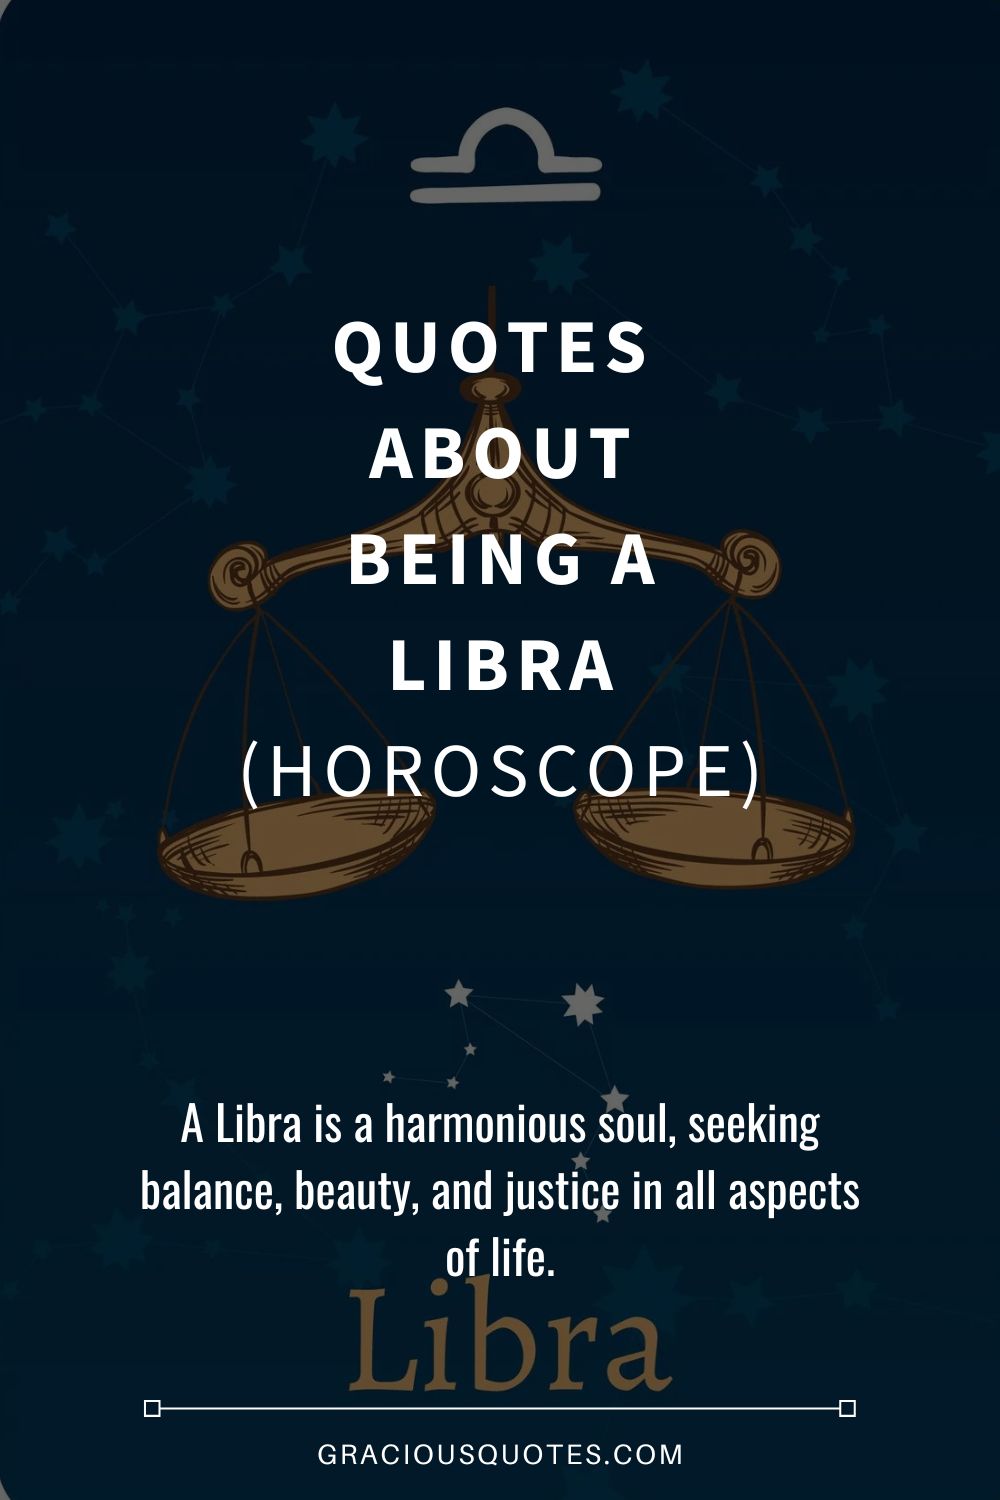 Quotes  About Being a Libra (HOROSCOPE) - Gracious Quotes